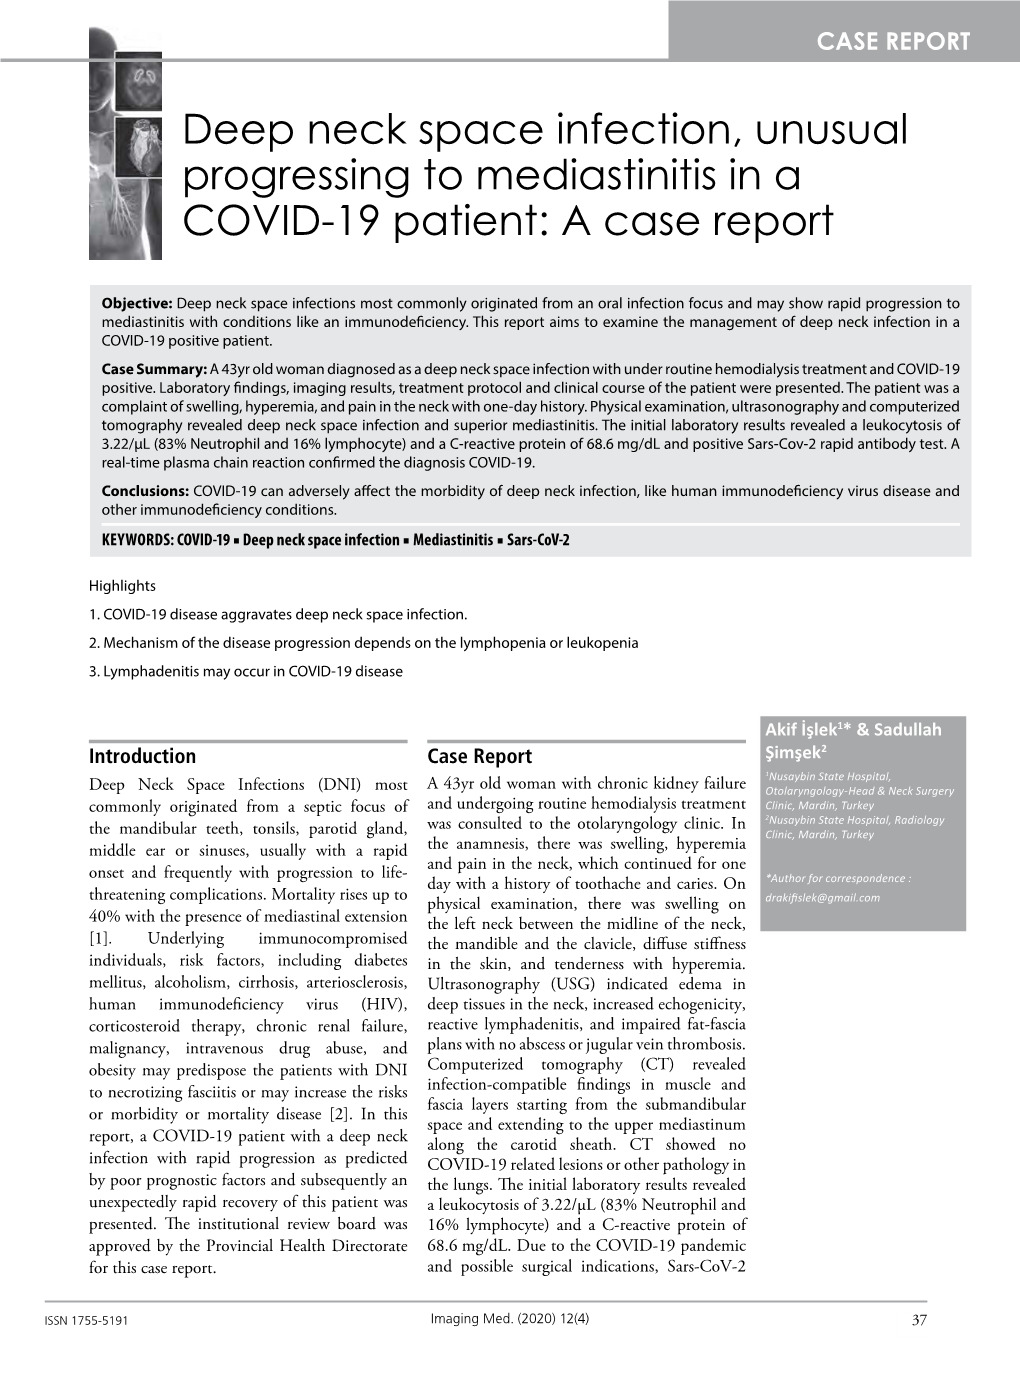 Deep Neck Space Infection, Unusual Progressing to Mediastinitis in a COVID-19 Patient: a Case Report